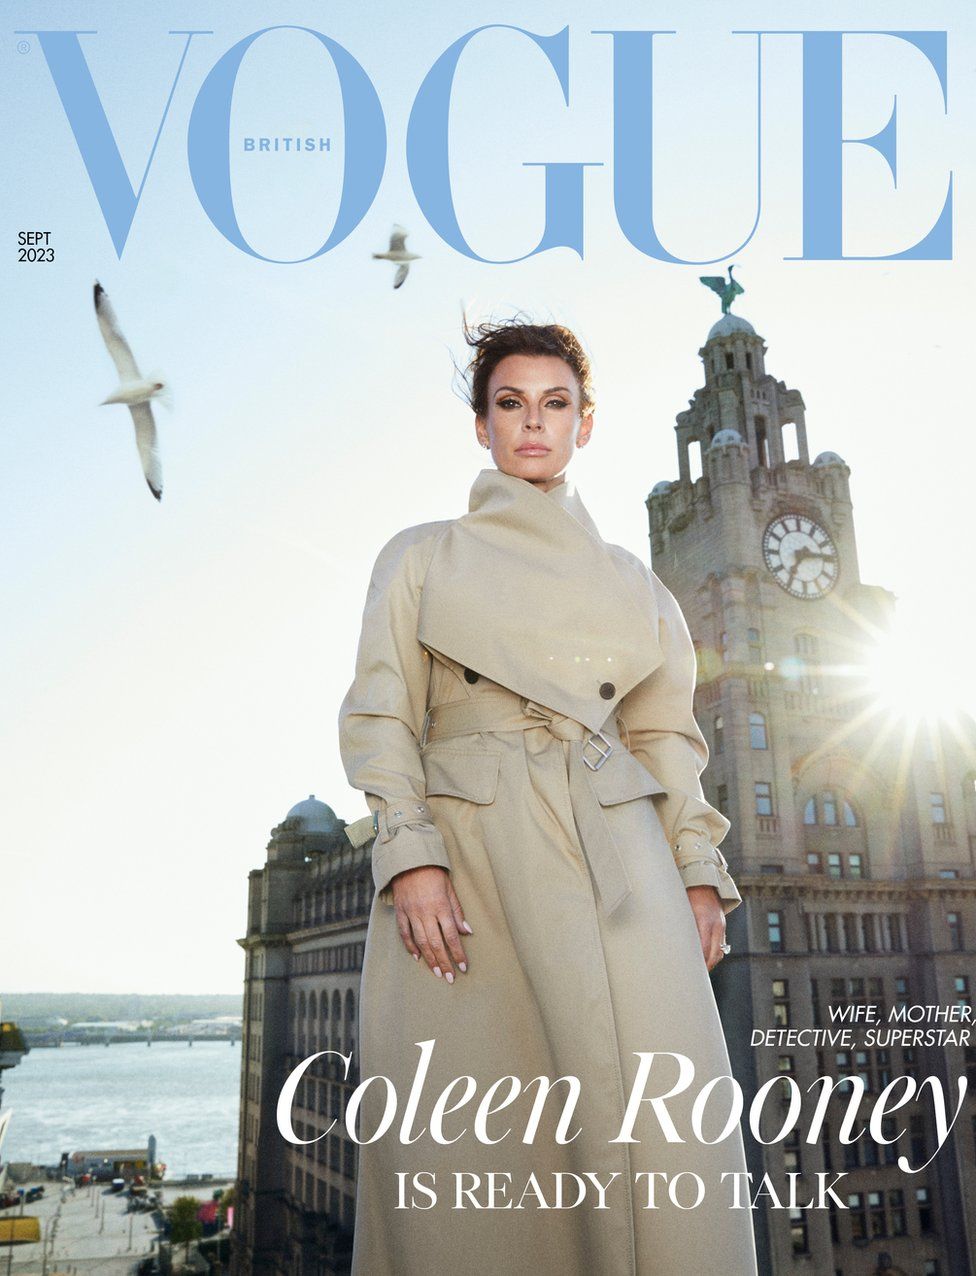 The September cover of Vogue magazine, featuring Coleen Rooney.